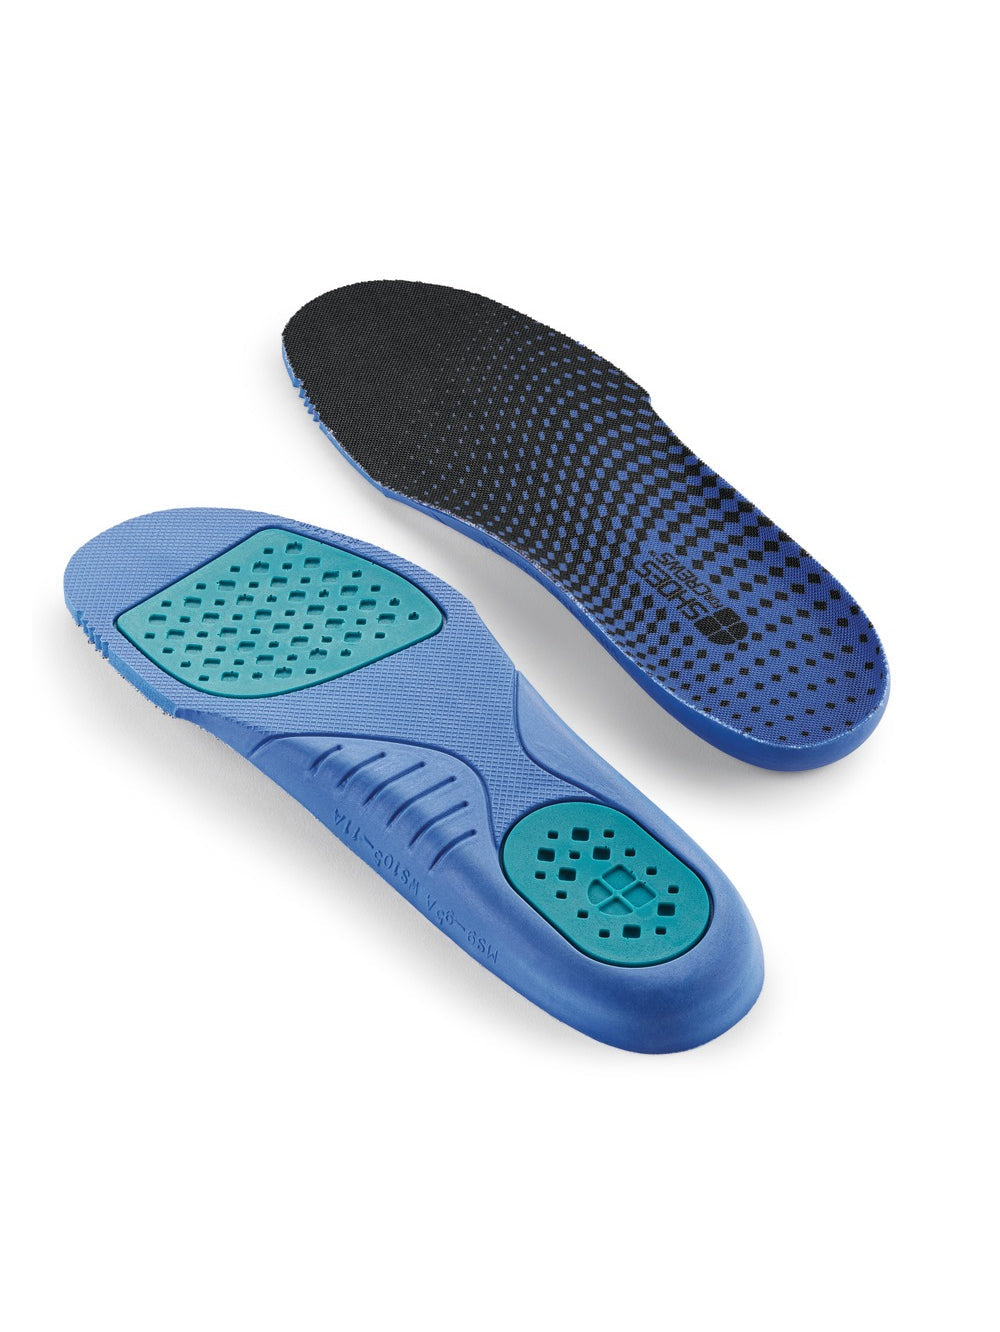 Comfort Insole With Gel by Shoes For Crews -  ChefsCotton